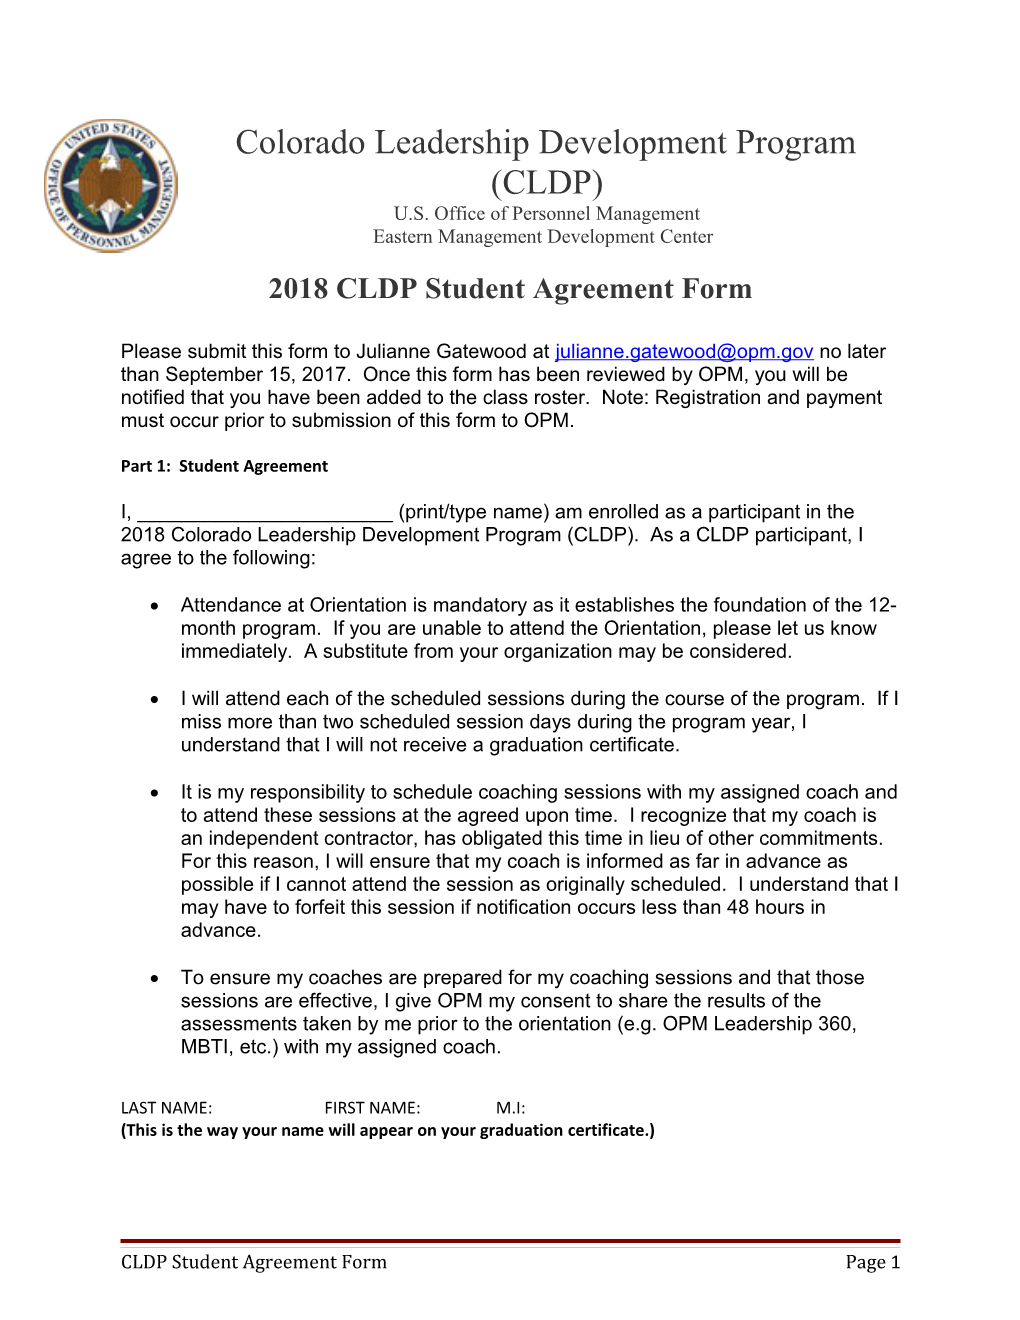 2018 CLDP Student Agreement Form